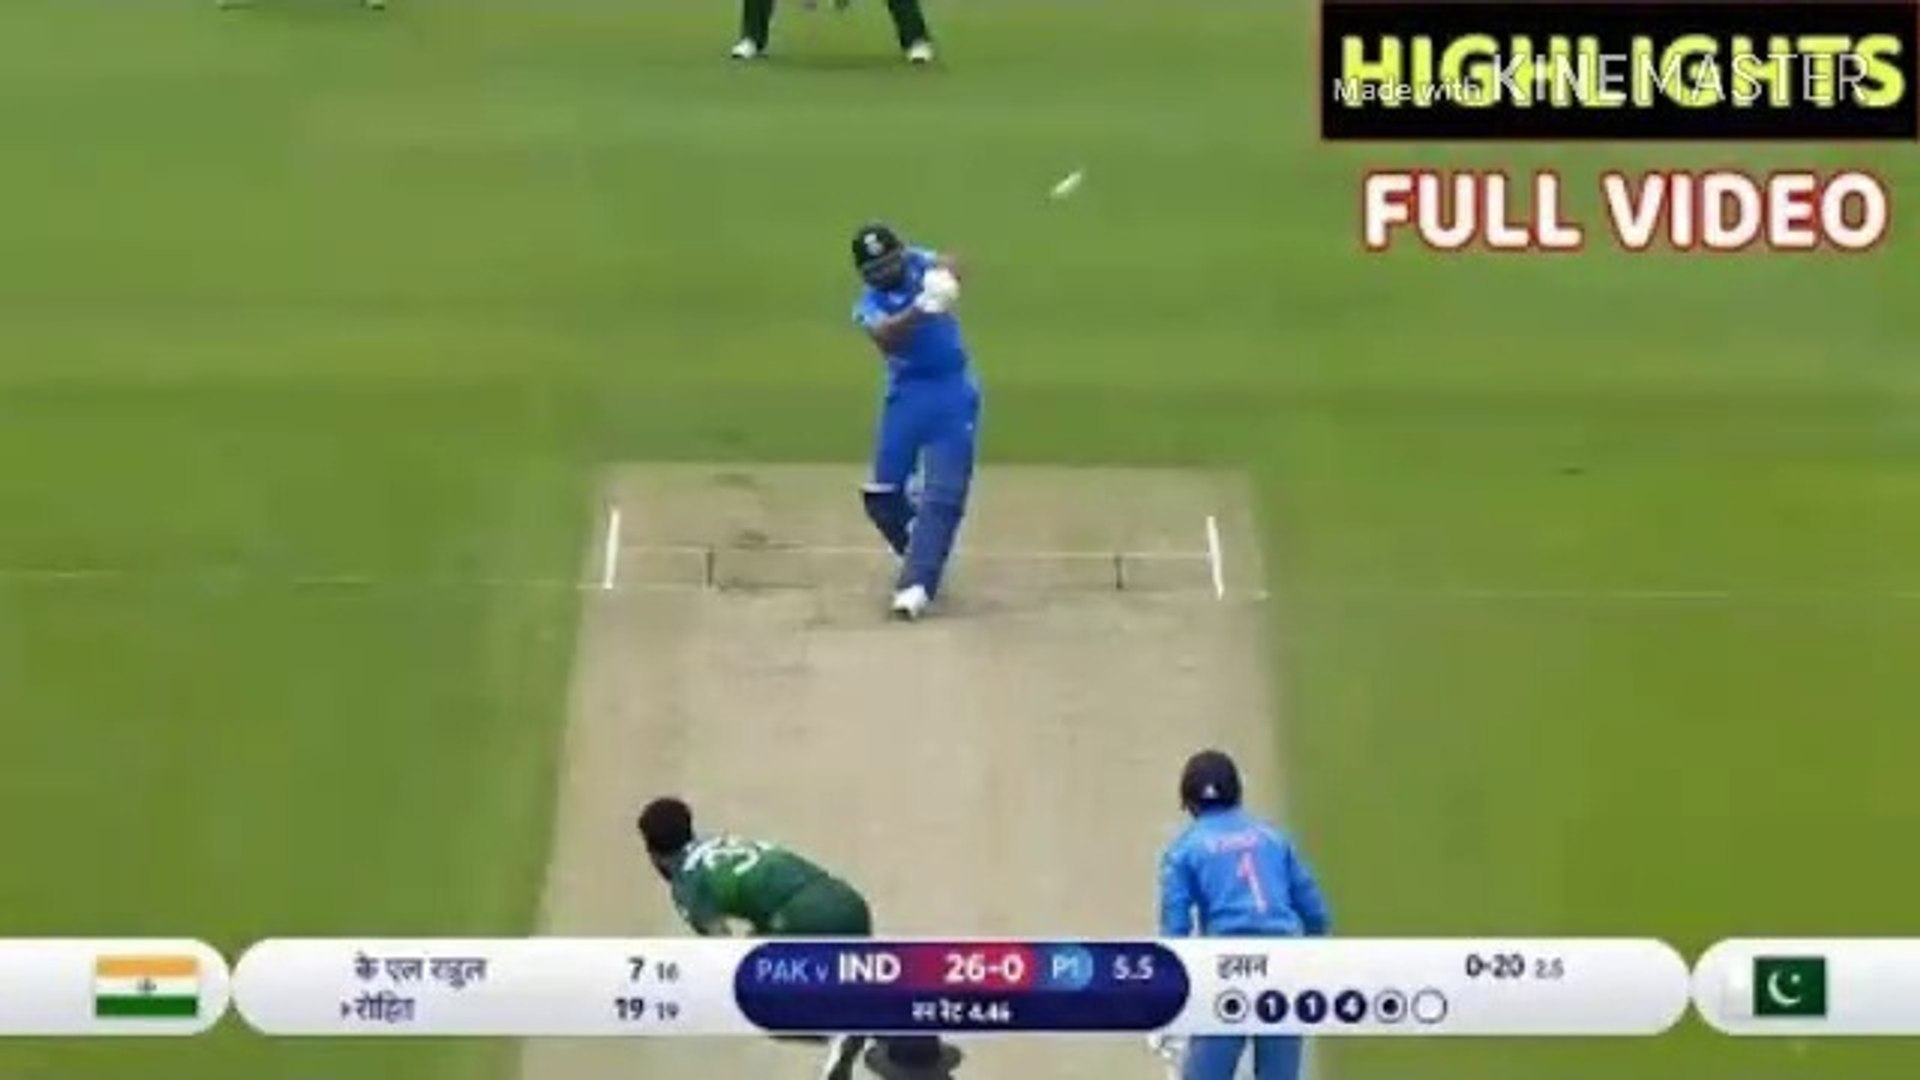 India Vs Pakistan Match World cup 2019 Full Match Highlights - video  Dailymotion